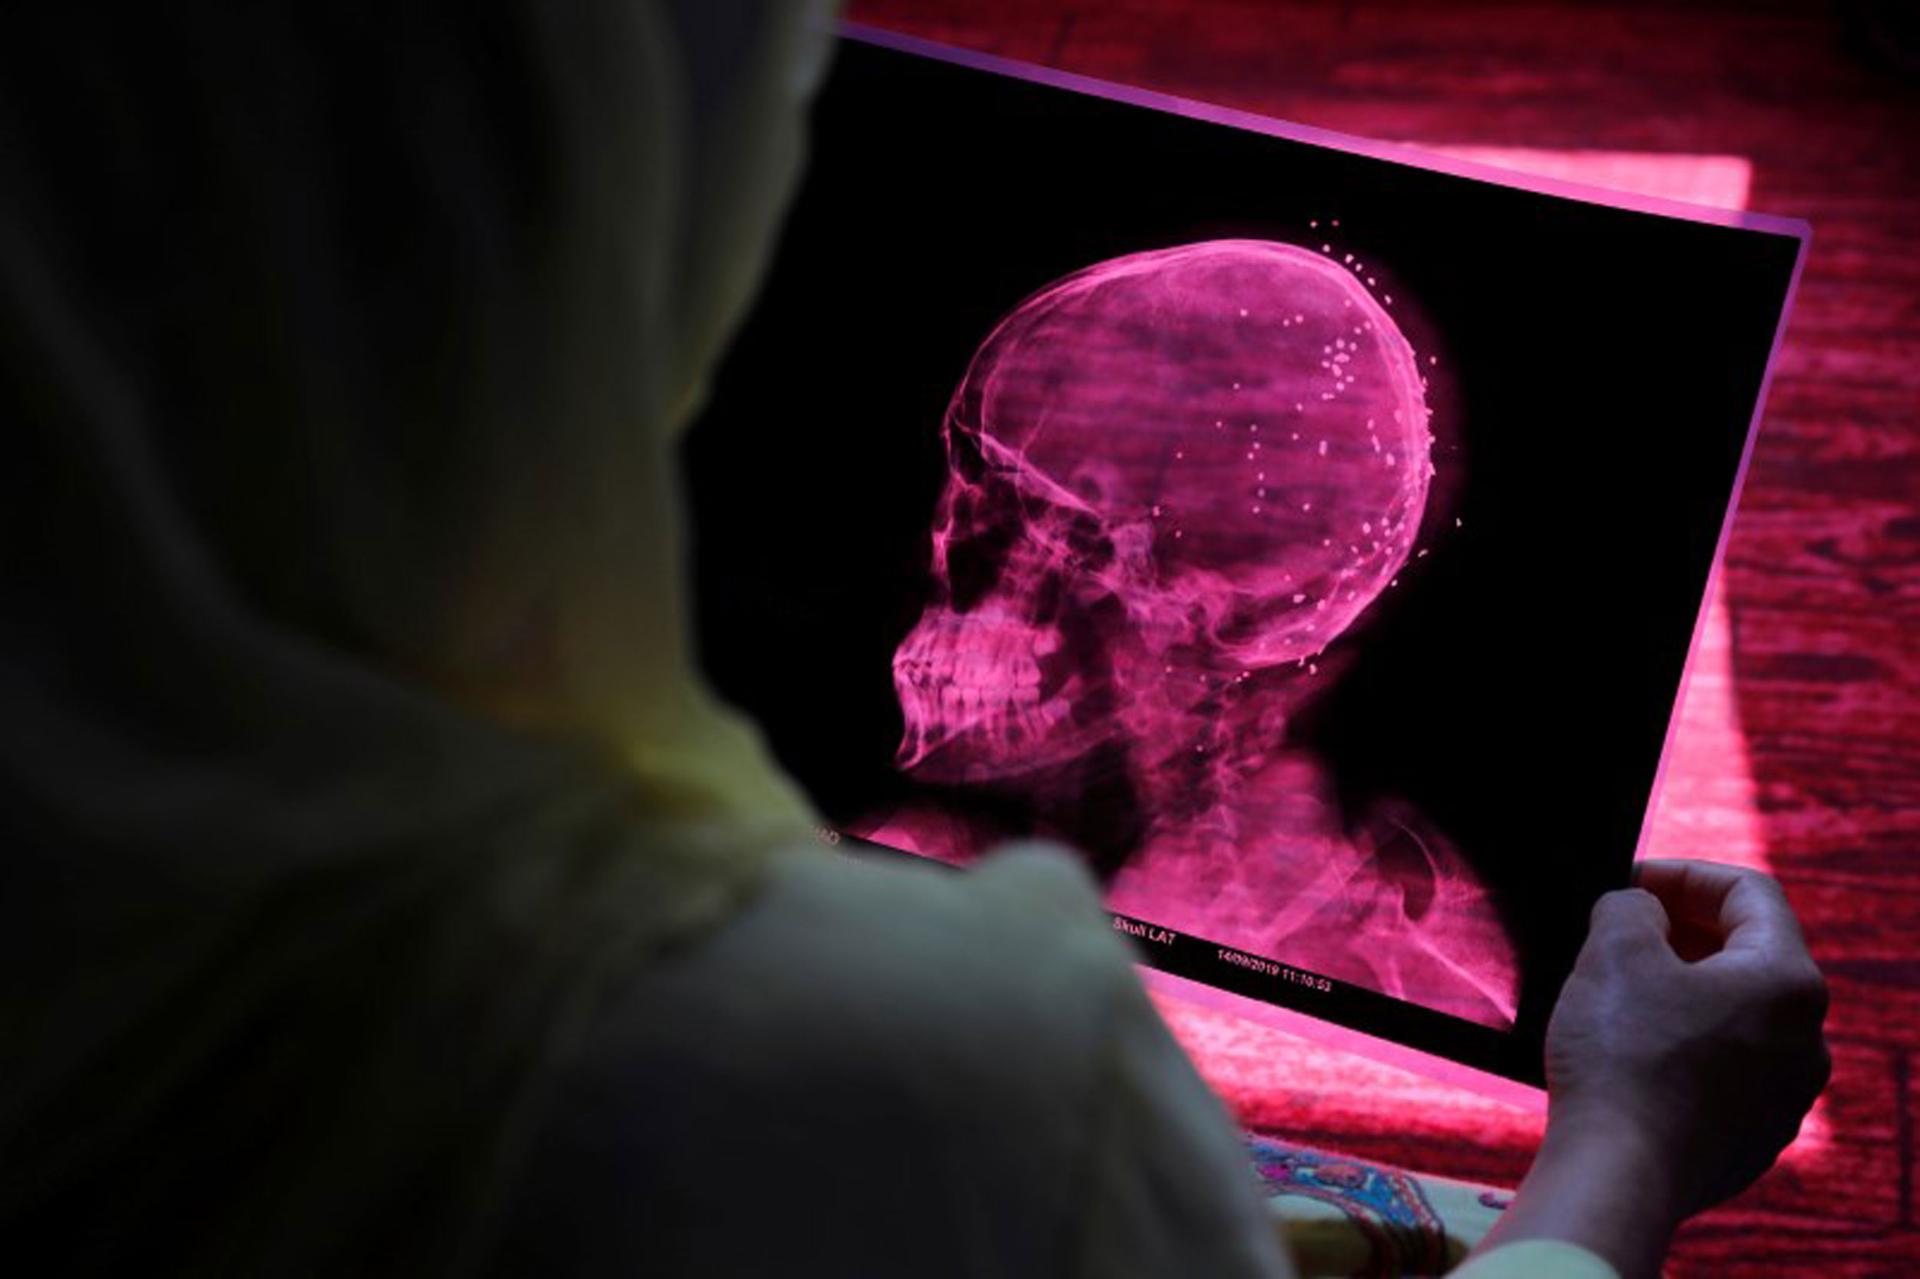 A woman is shown from over her shoulder holding a pink colored X-ray